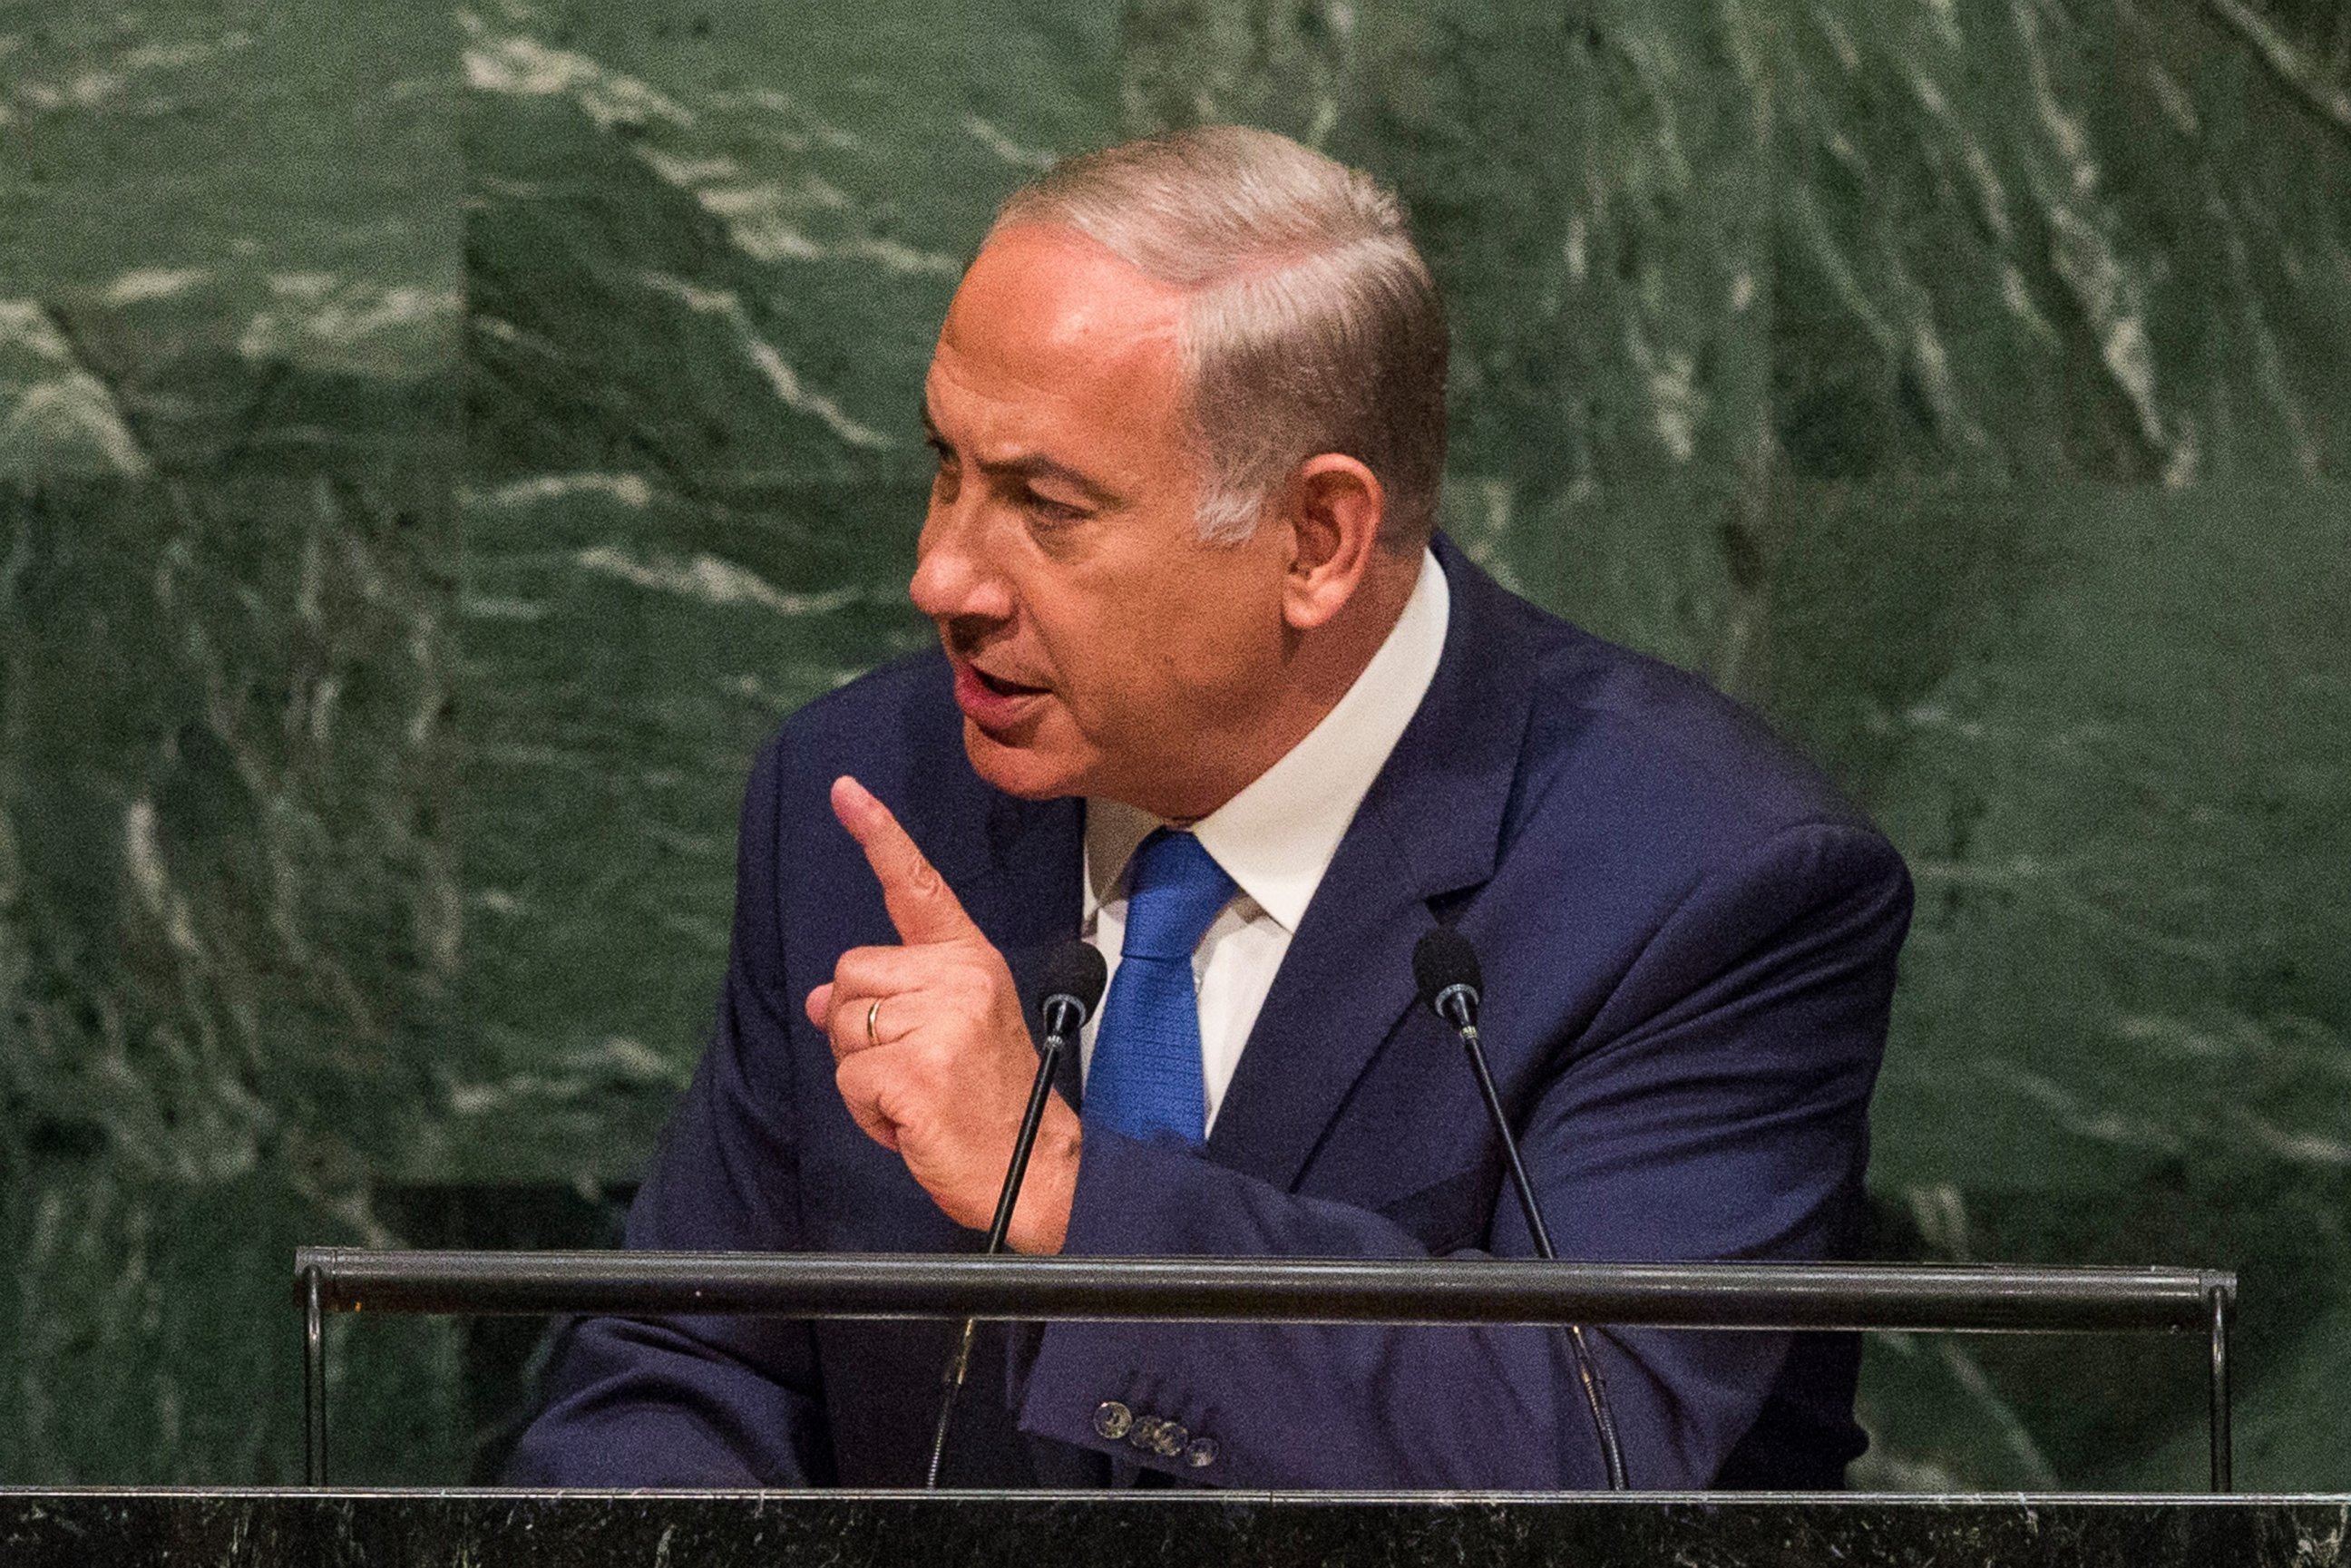 PHOTO: Benjamin Netanyahu, Prime Minister of Israel, speaks at the United Nations General Assembly on Oct. 1, 2015 in New York.